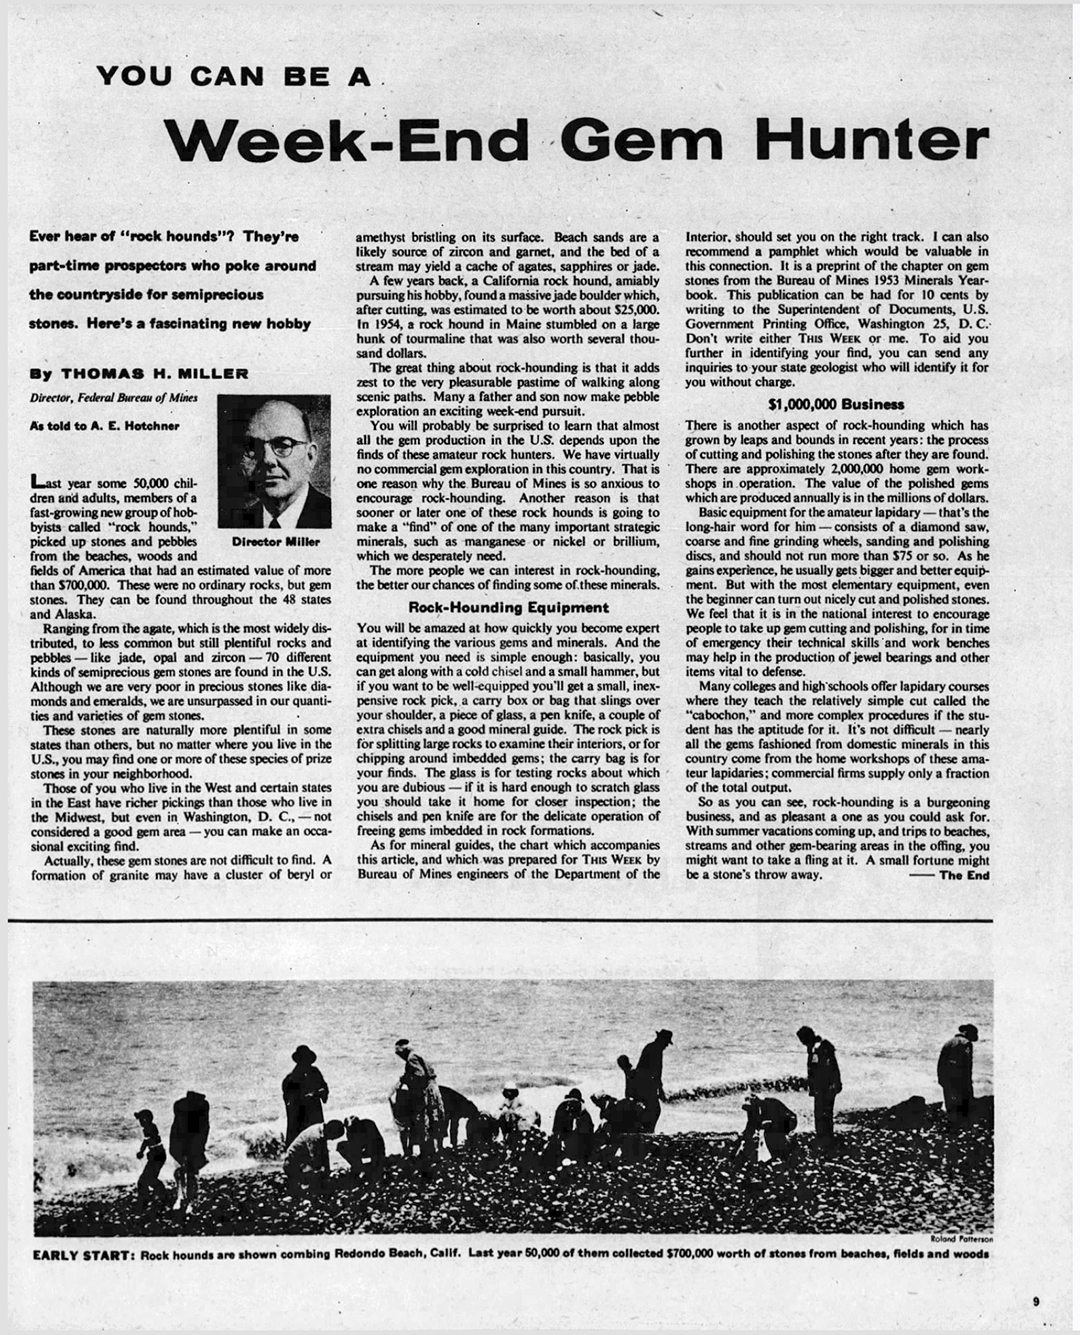 You can be a week-end gem hunter says Federal Bureau of Mines